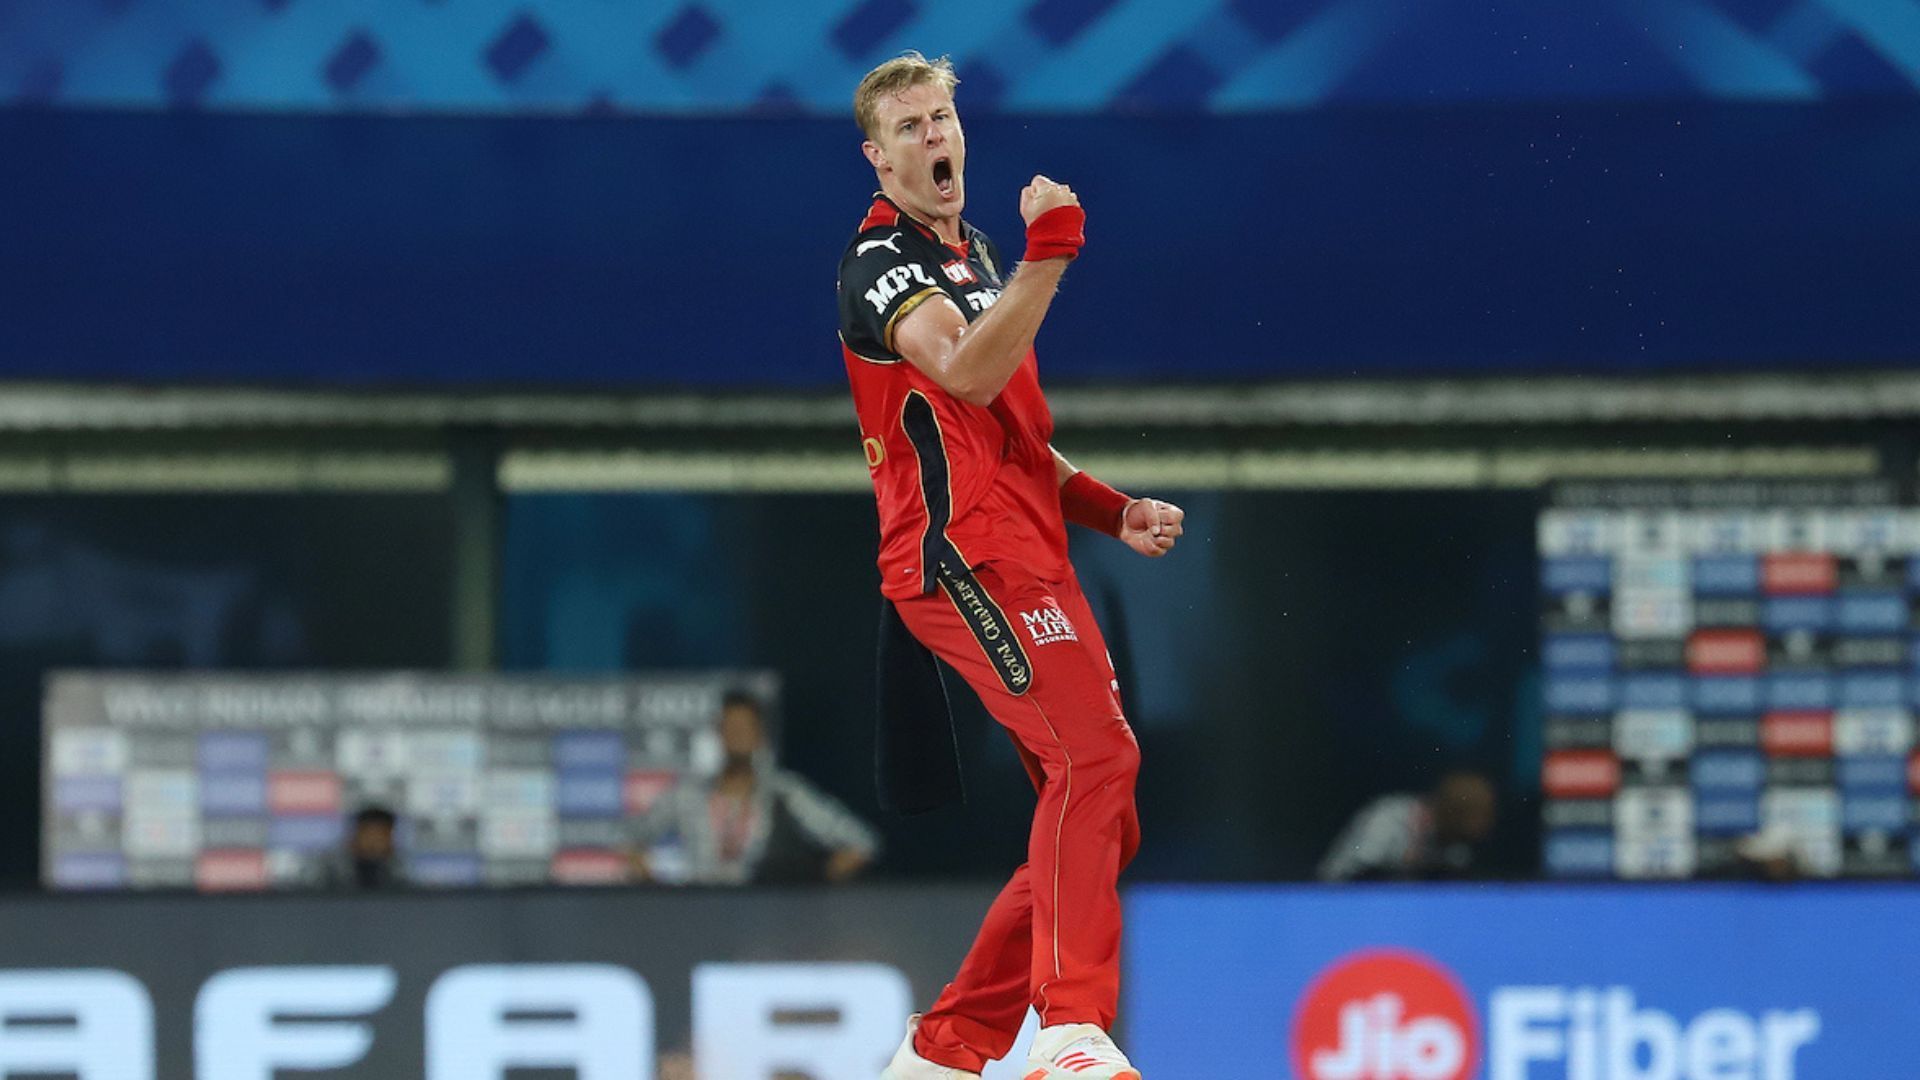 Jamieson was part of the RCB squad back in 2021.